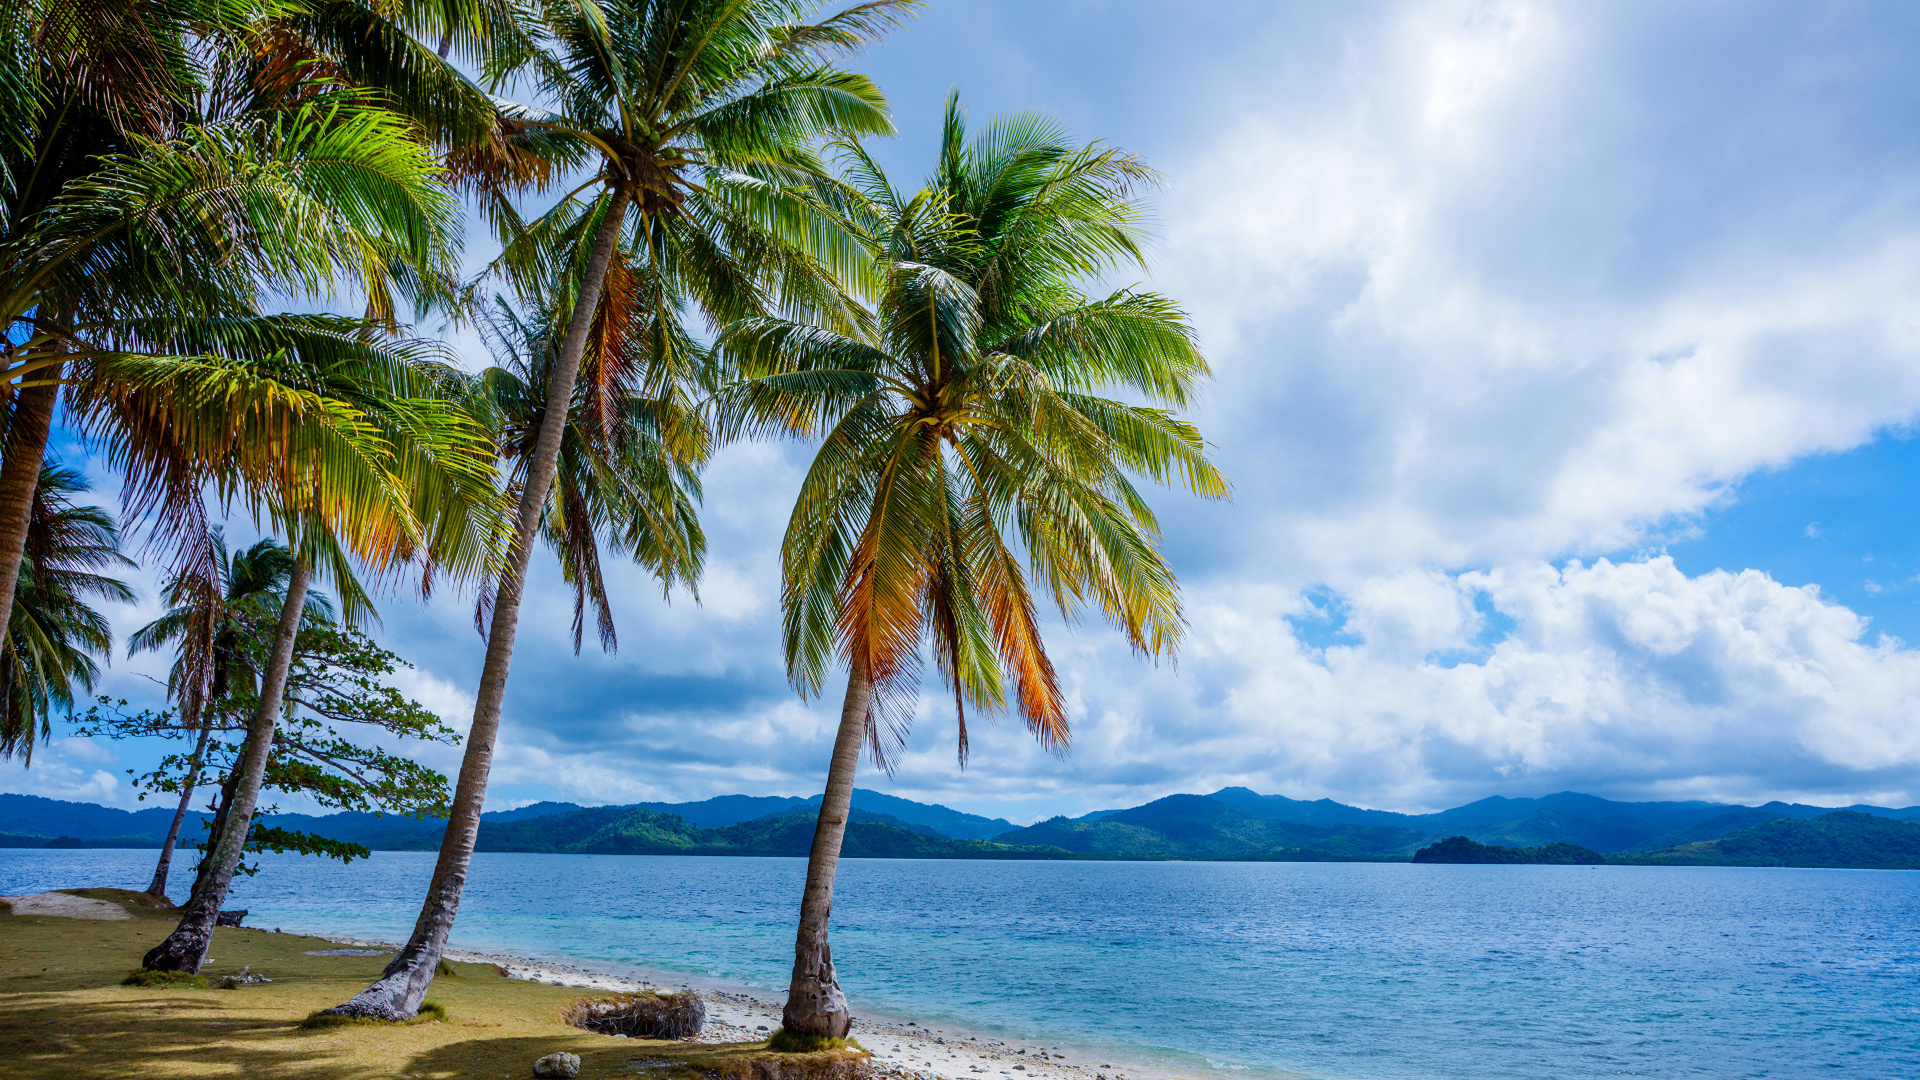 Coconut Tree Near Sea Under White Clouds and Blue Sky During Daytime. Wallpaper in 1920x1080 Resolution